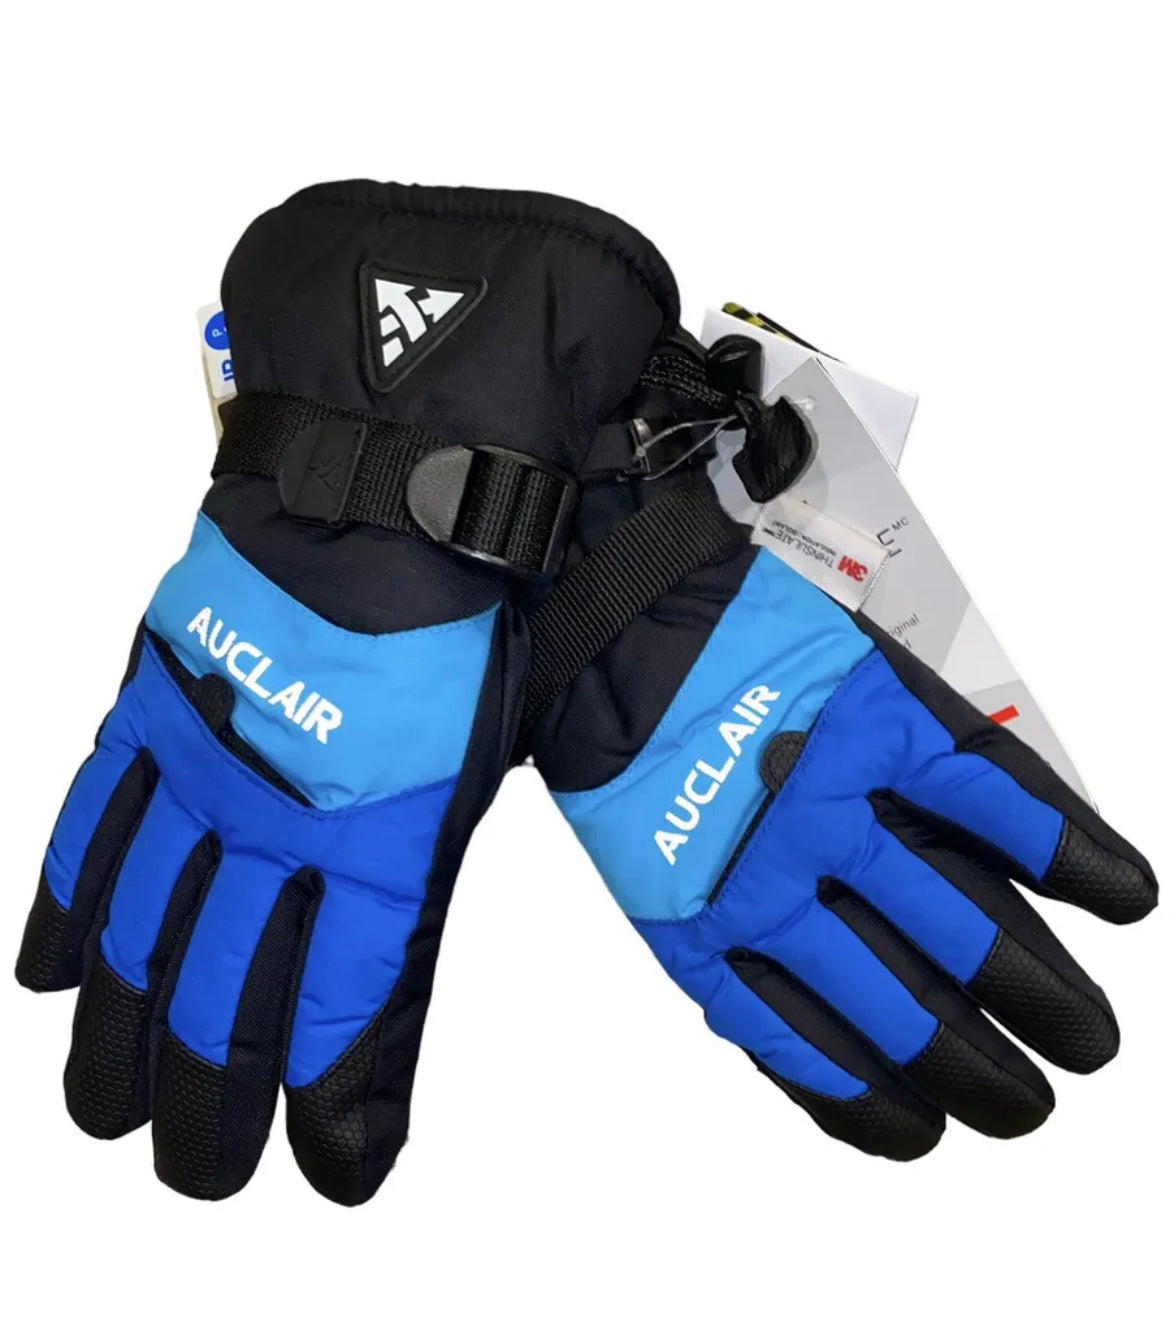 NWT AUCLAIR GLOVES juniors size Small Blue Black Reflective